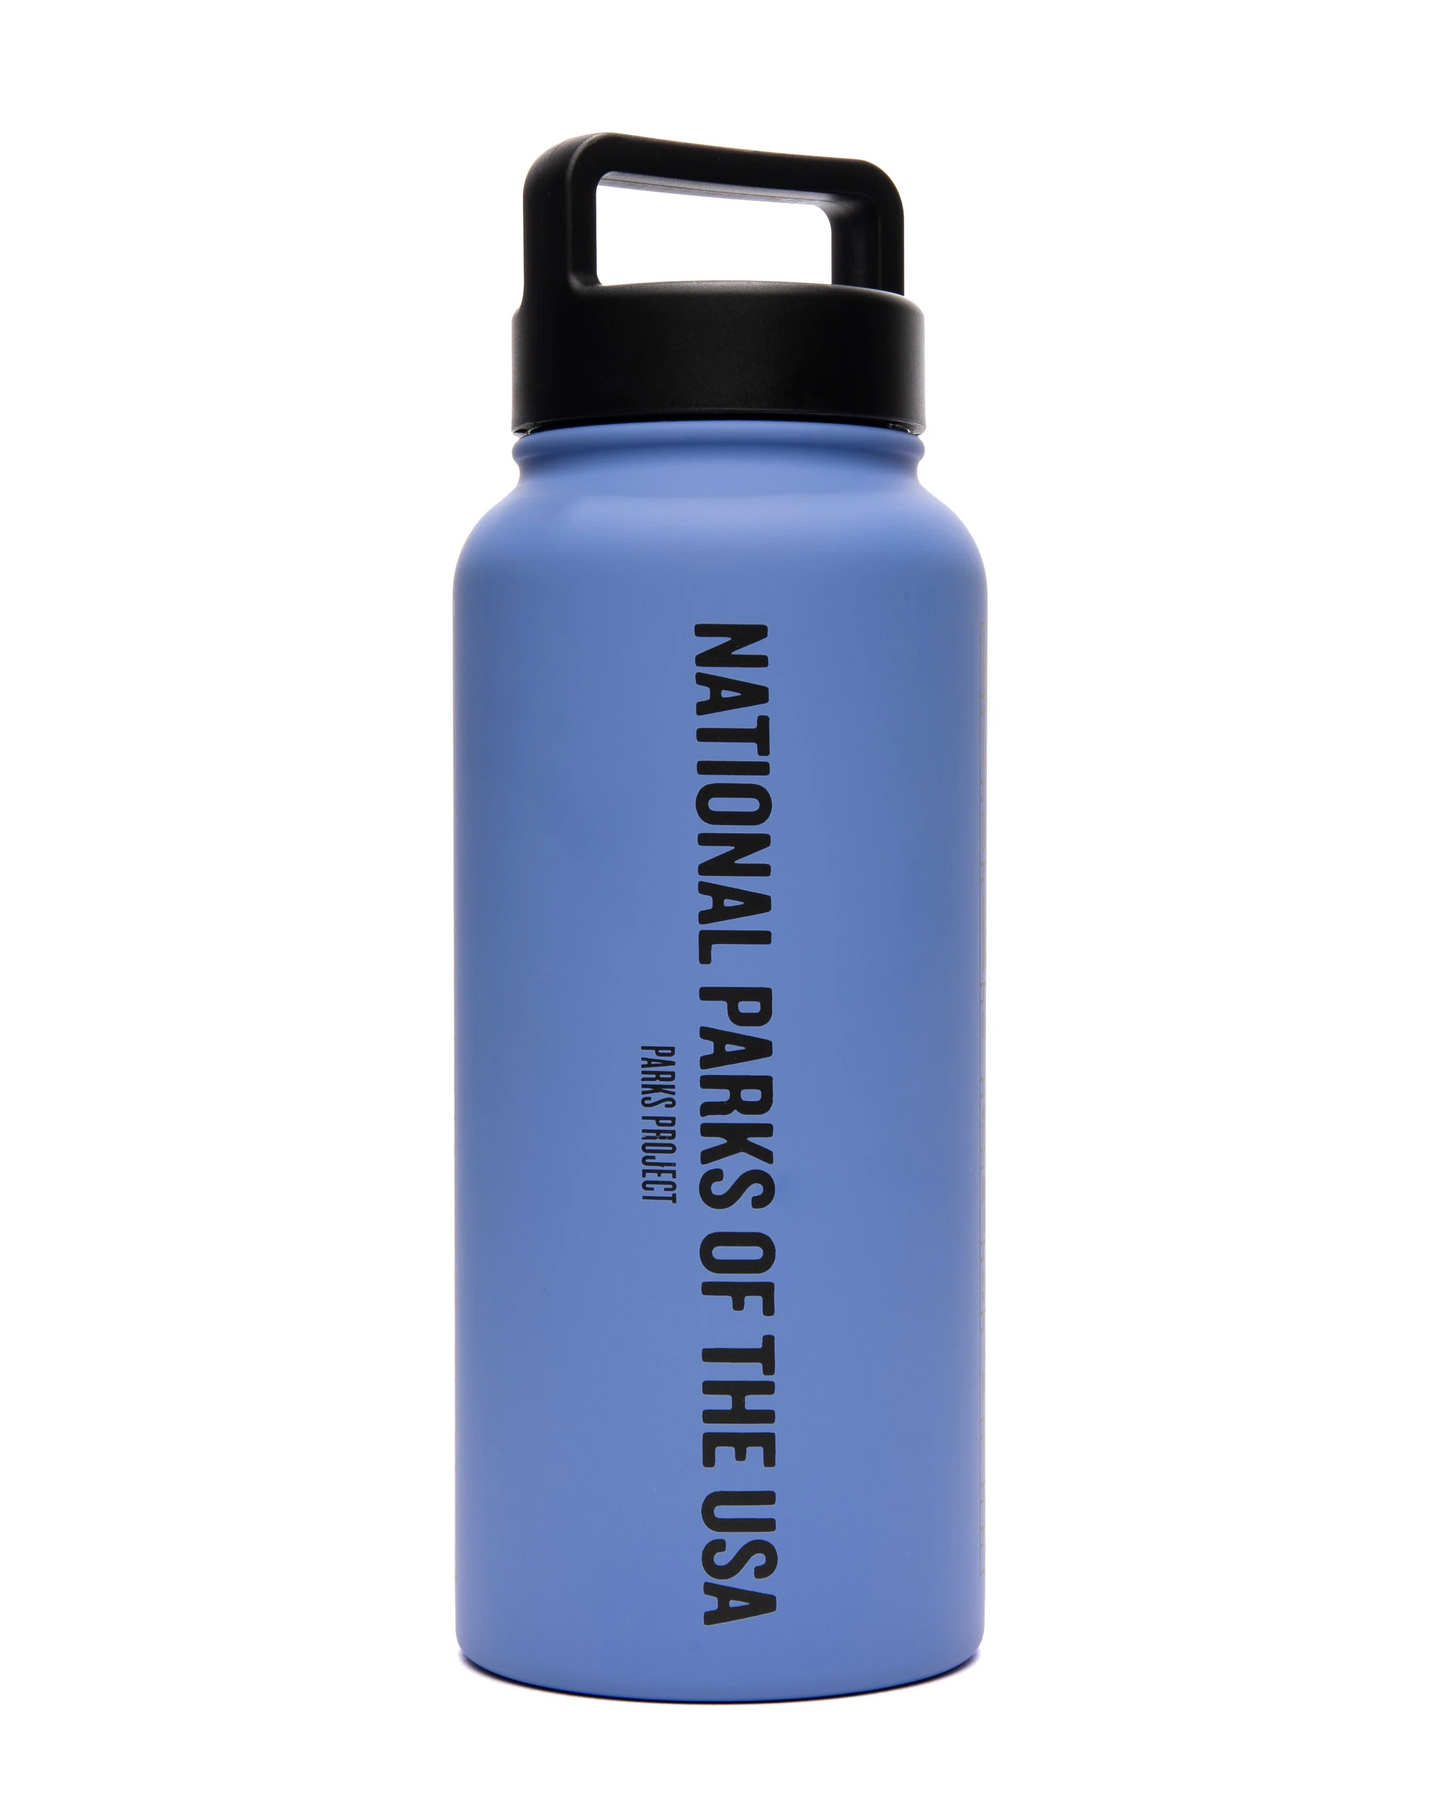 Parks Project National Parks Checklist 32 oz. Insulated Water Bottle